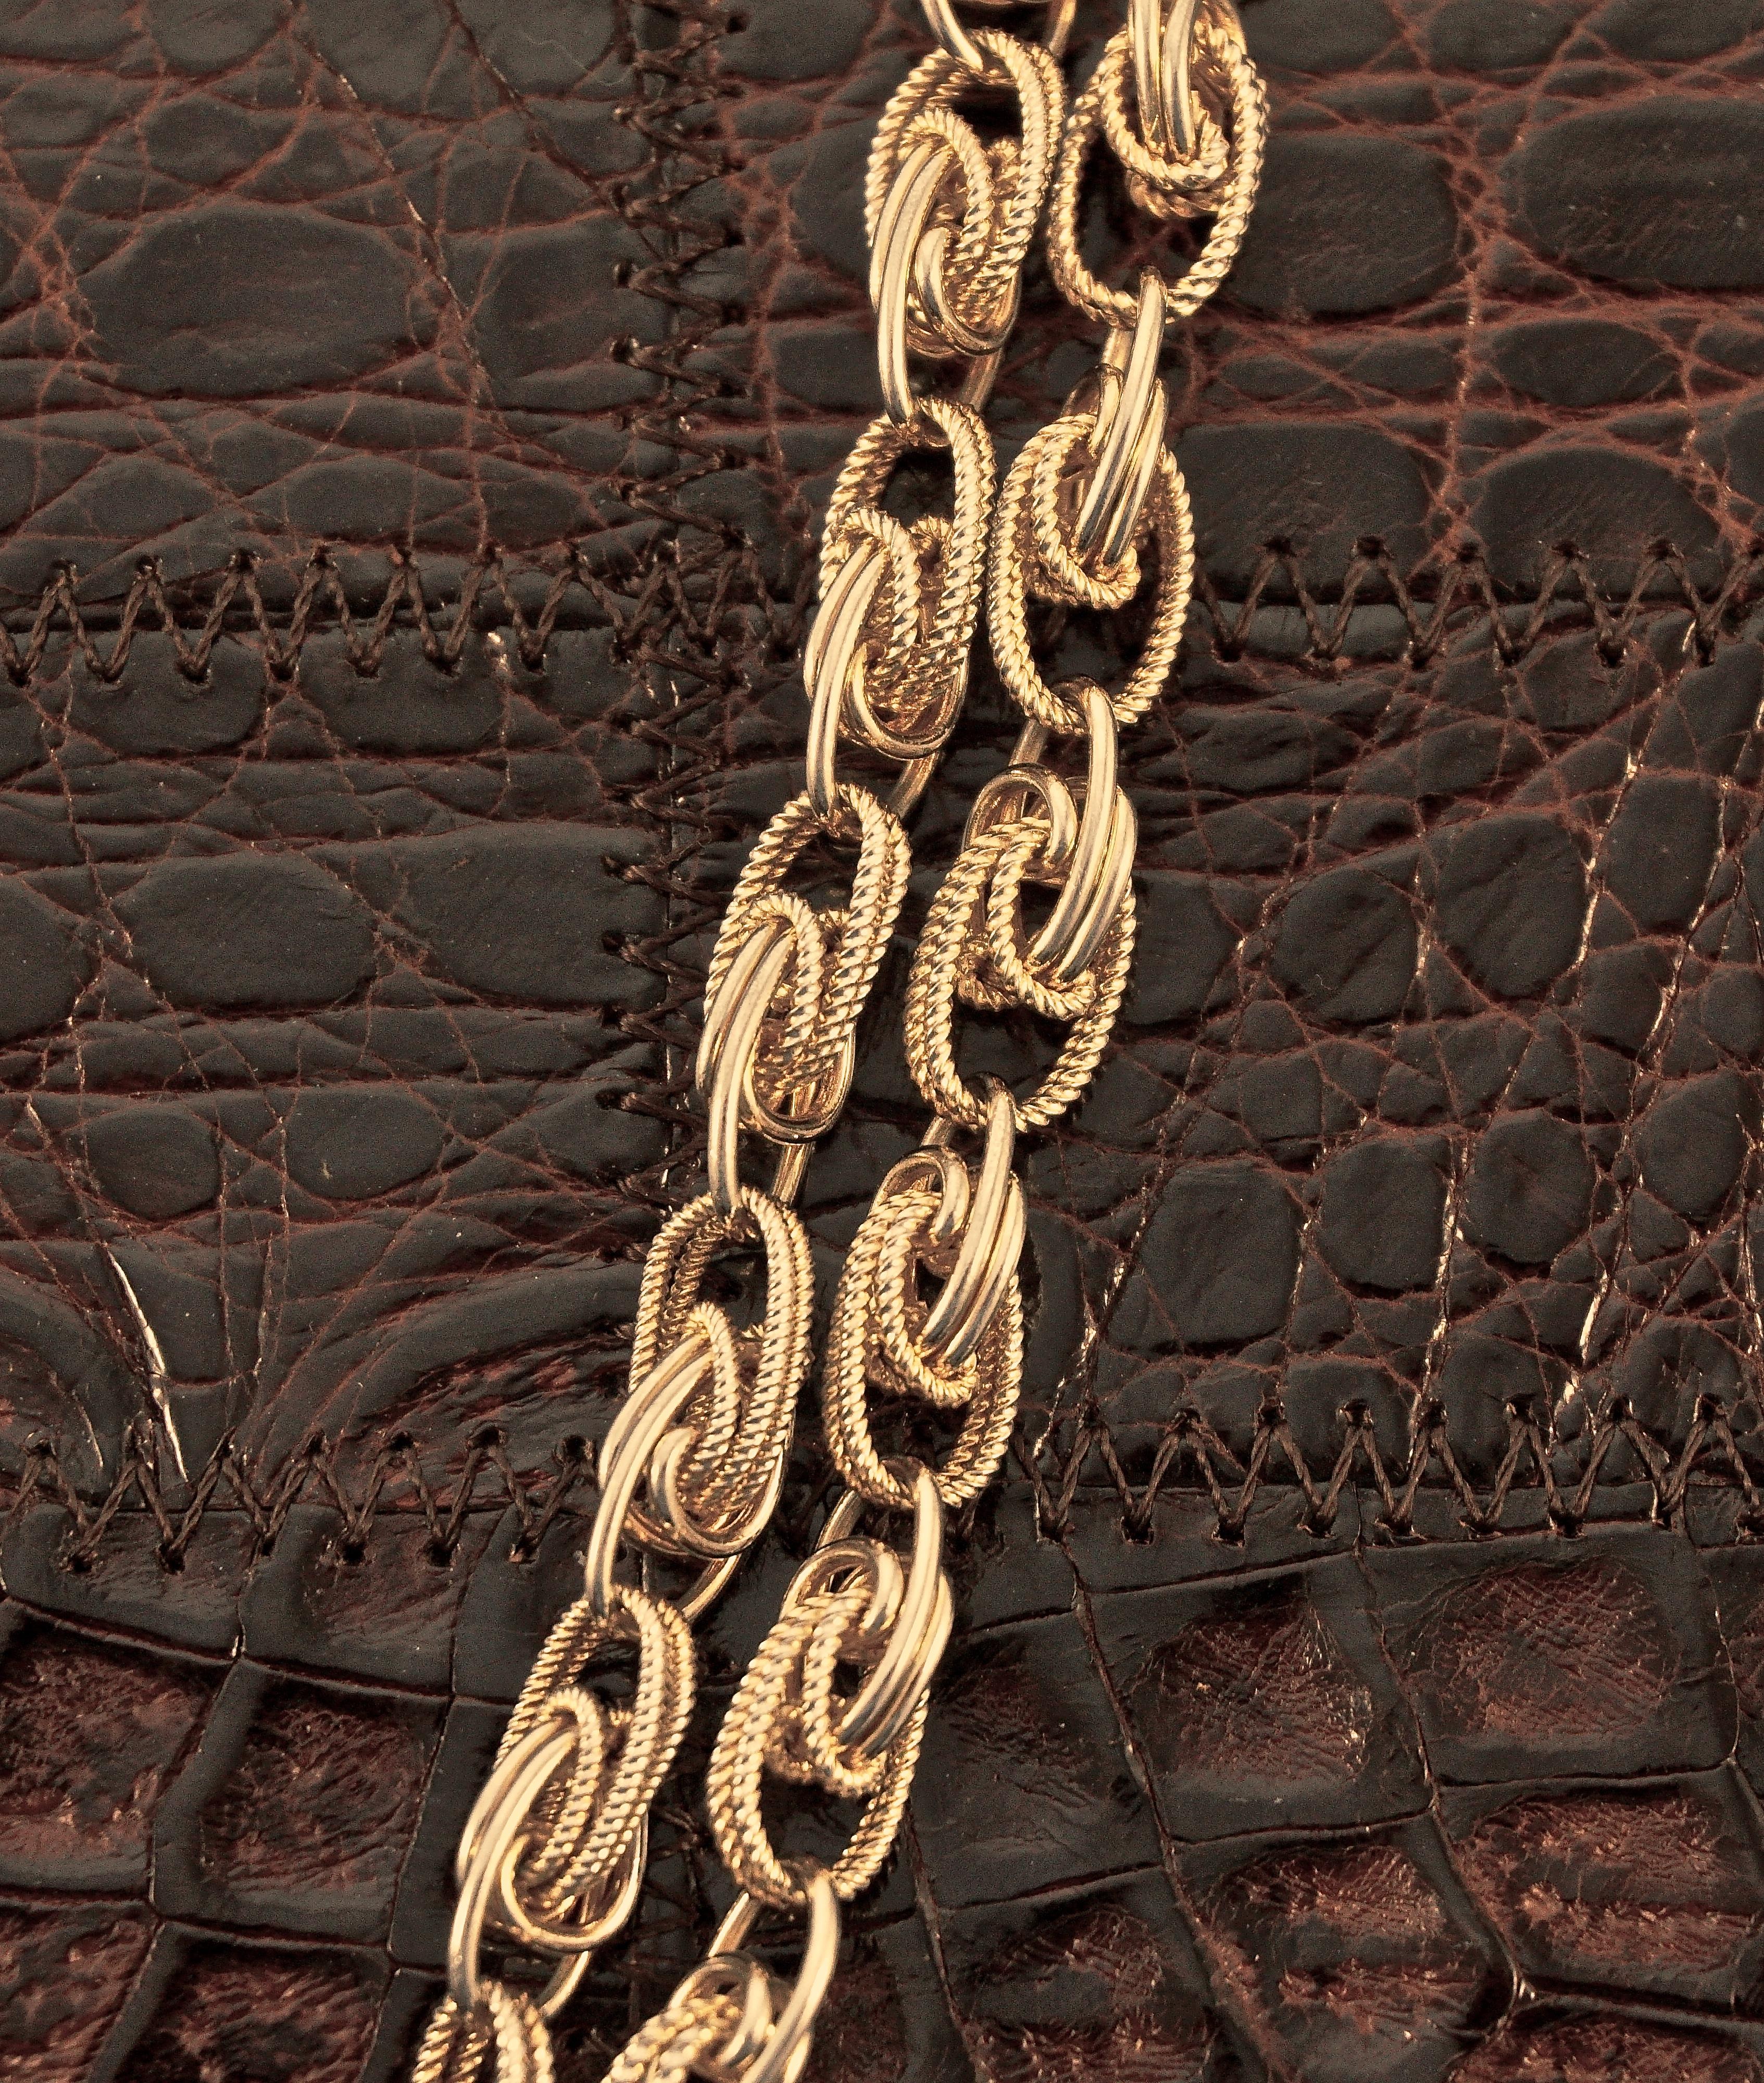 Luxurious Dofan Paris mid brown alligator and leather handbag with gold plated trim. Measuring width 24cm / 9.45 inches at the top, increasing to 25.9cm / 10.19 inches at the base. The height measures 16.4cm / 6.45 inches and depth is 4.5cm / 1.77